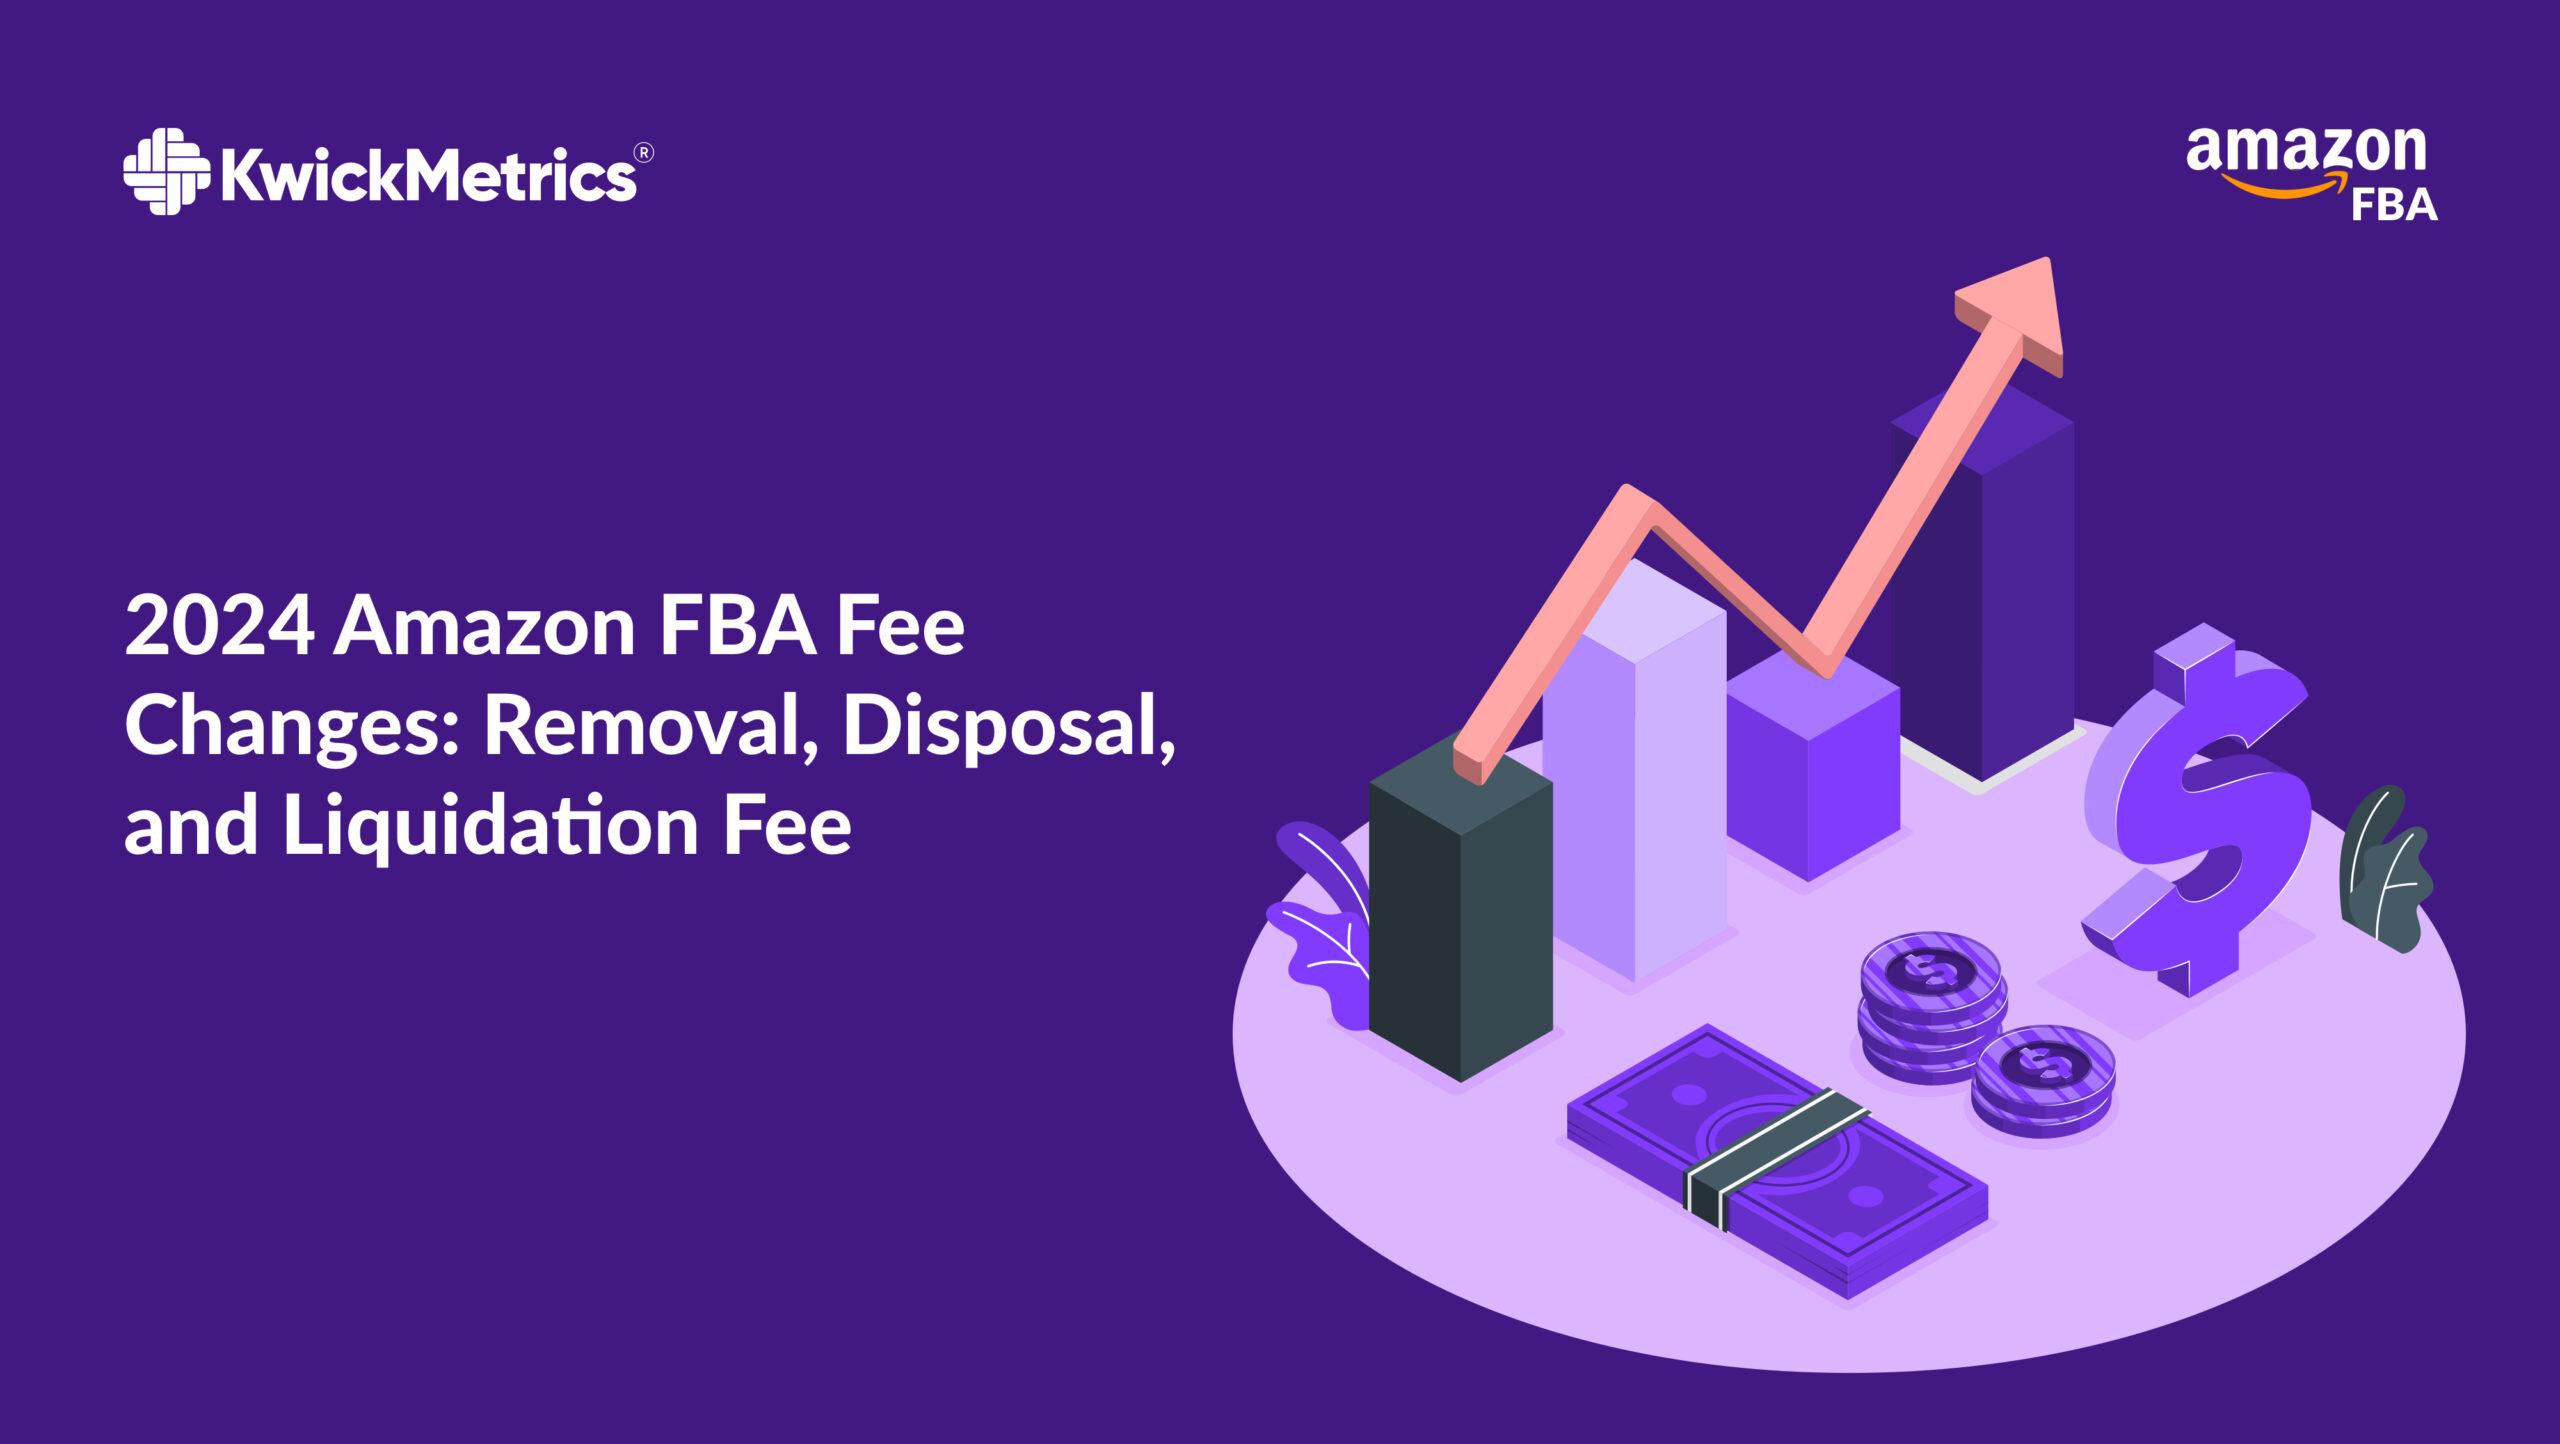 2024 Amazon FBA Fee Changes: Removal, Disposal, and Liquidation Fee